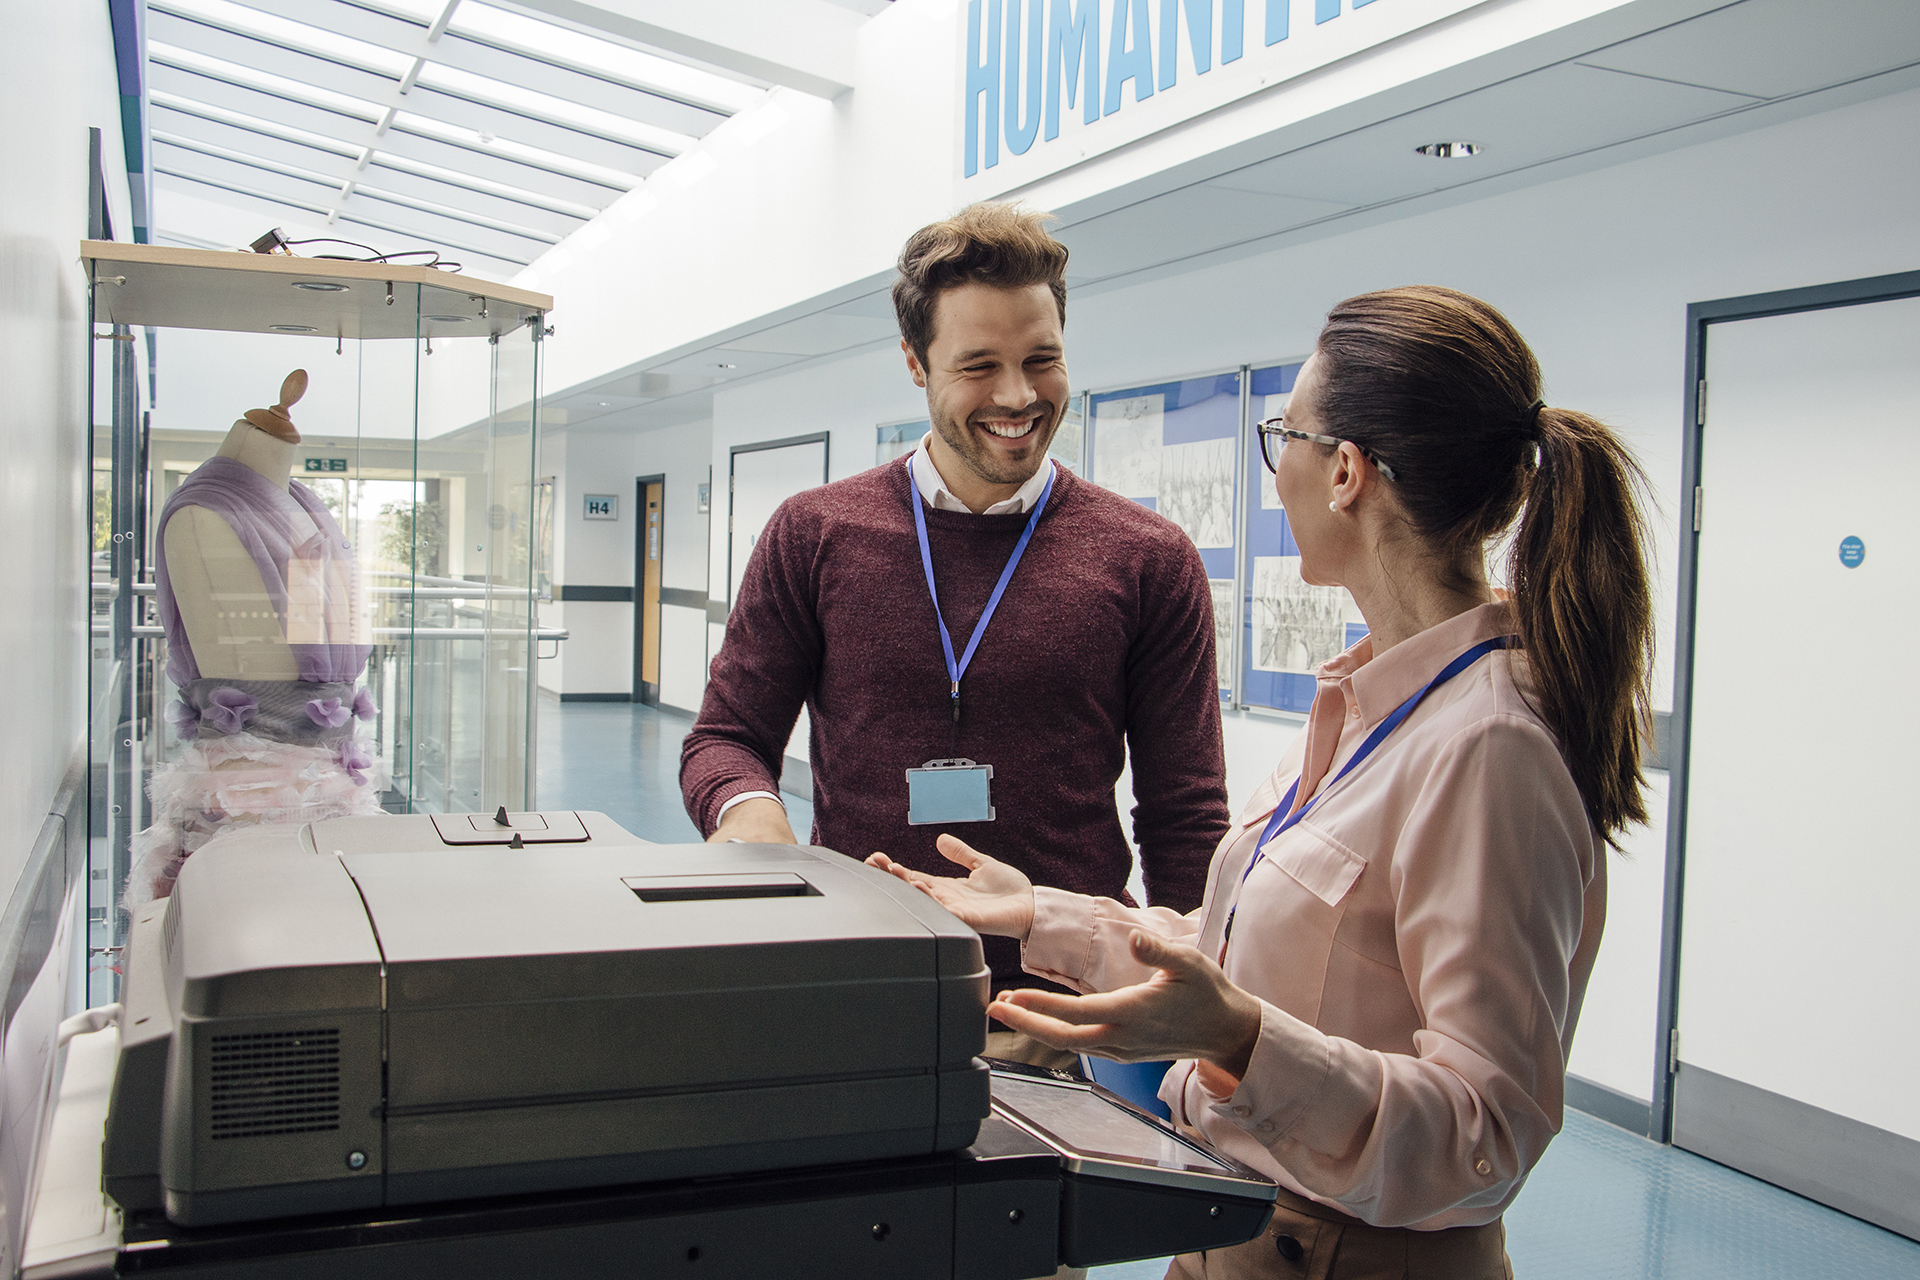 Five advantages of Managed Print Services for Education